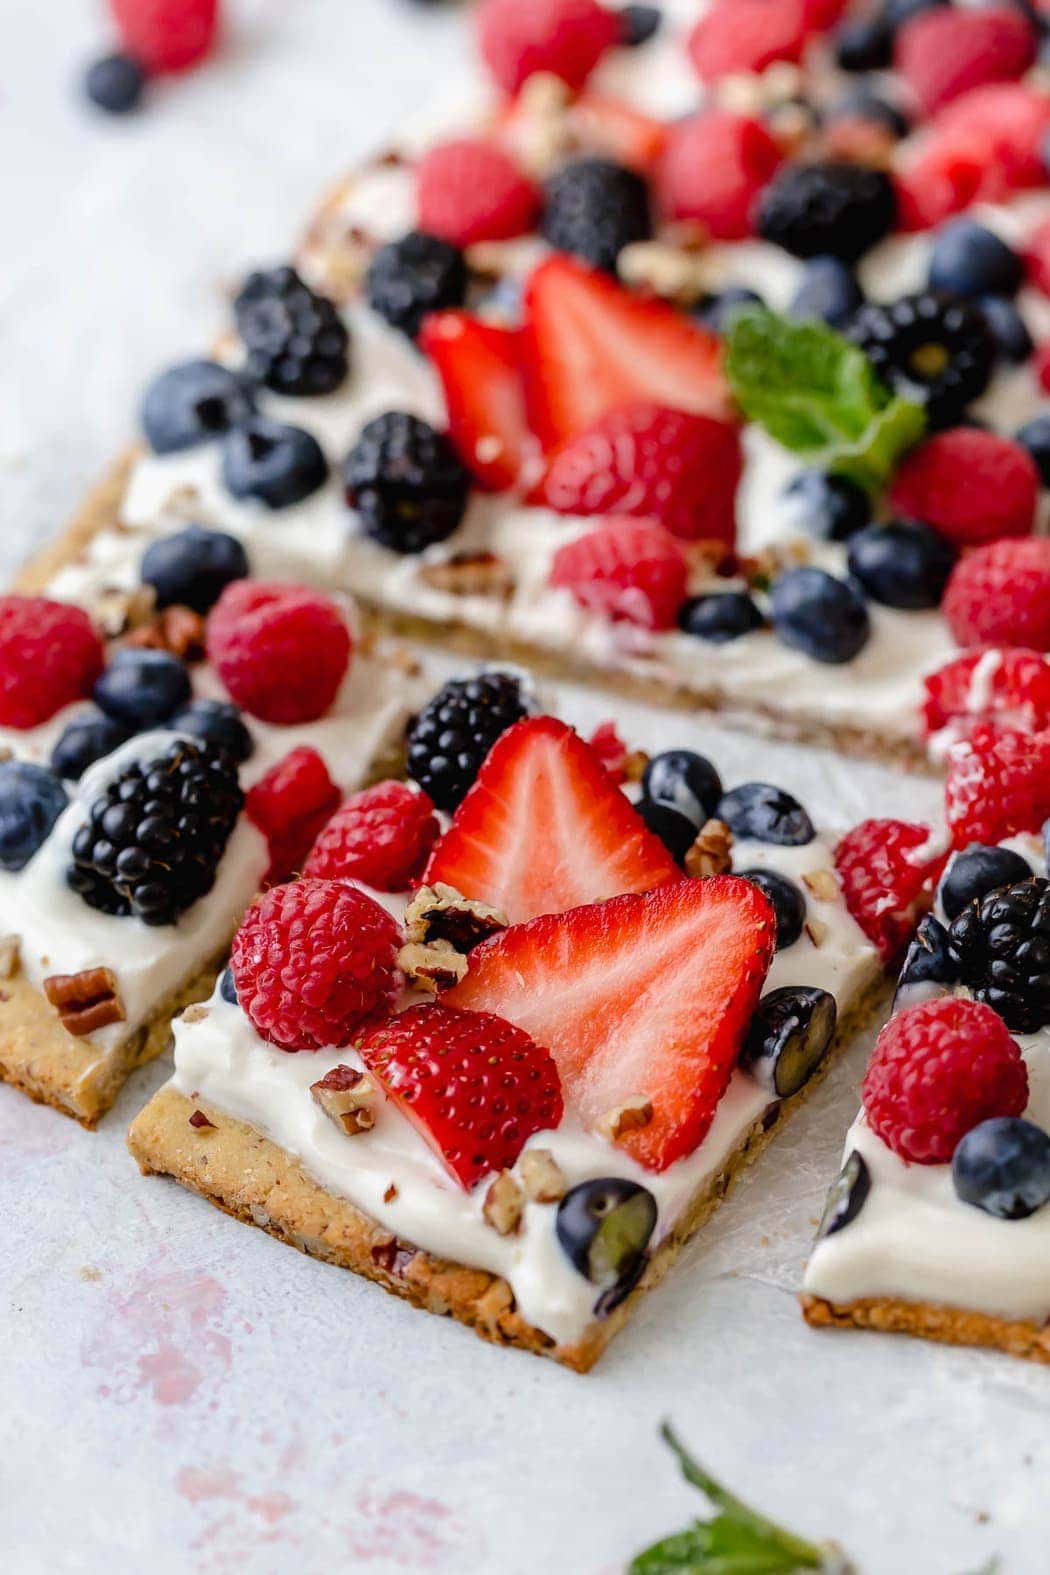 Photo of Gluten-free Berry Fruit Pizza garnished with a sprig of mint in the center. Pizza is topped with a Greek yogurt spread and an assortment of berries. This photo is showing the first row of pizza cut into squares. 